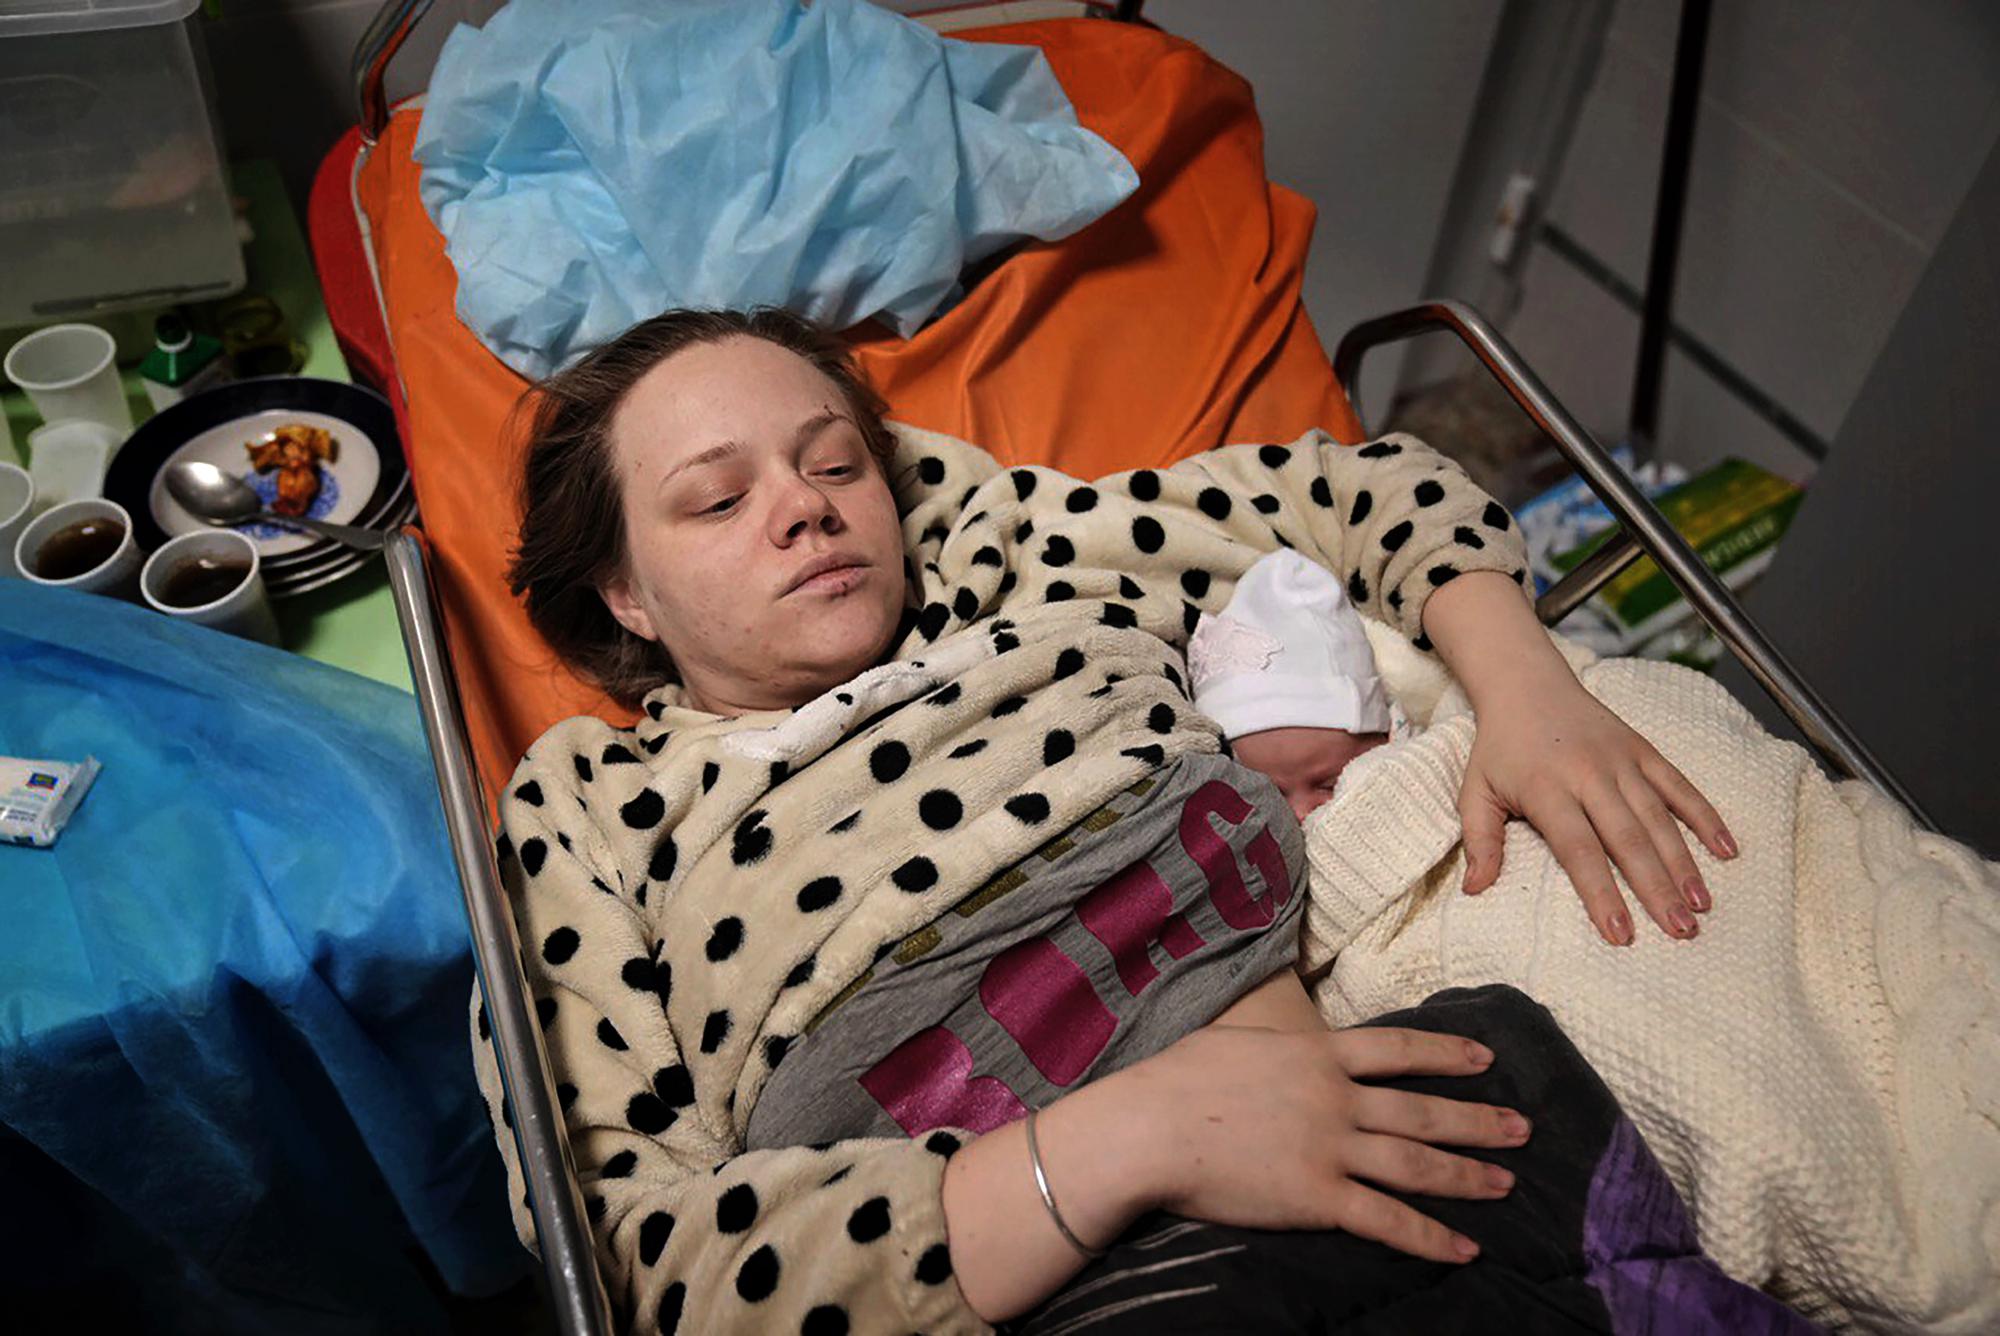 FILE - Mariana Vishegirskaya lies in a hospital bed after giving birth to her daughter Veronika, in Mariupol, Ukraine, Friday, March 11, 2022. Vishegirskaya survived the Russian airstrike on a children's and maternity hospital in Mariupol on Wednesday. (AP Photo/Evgeniy Maloletka, File)